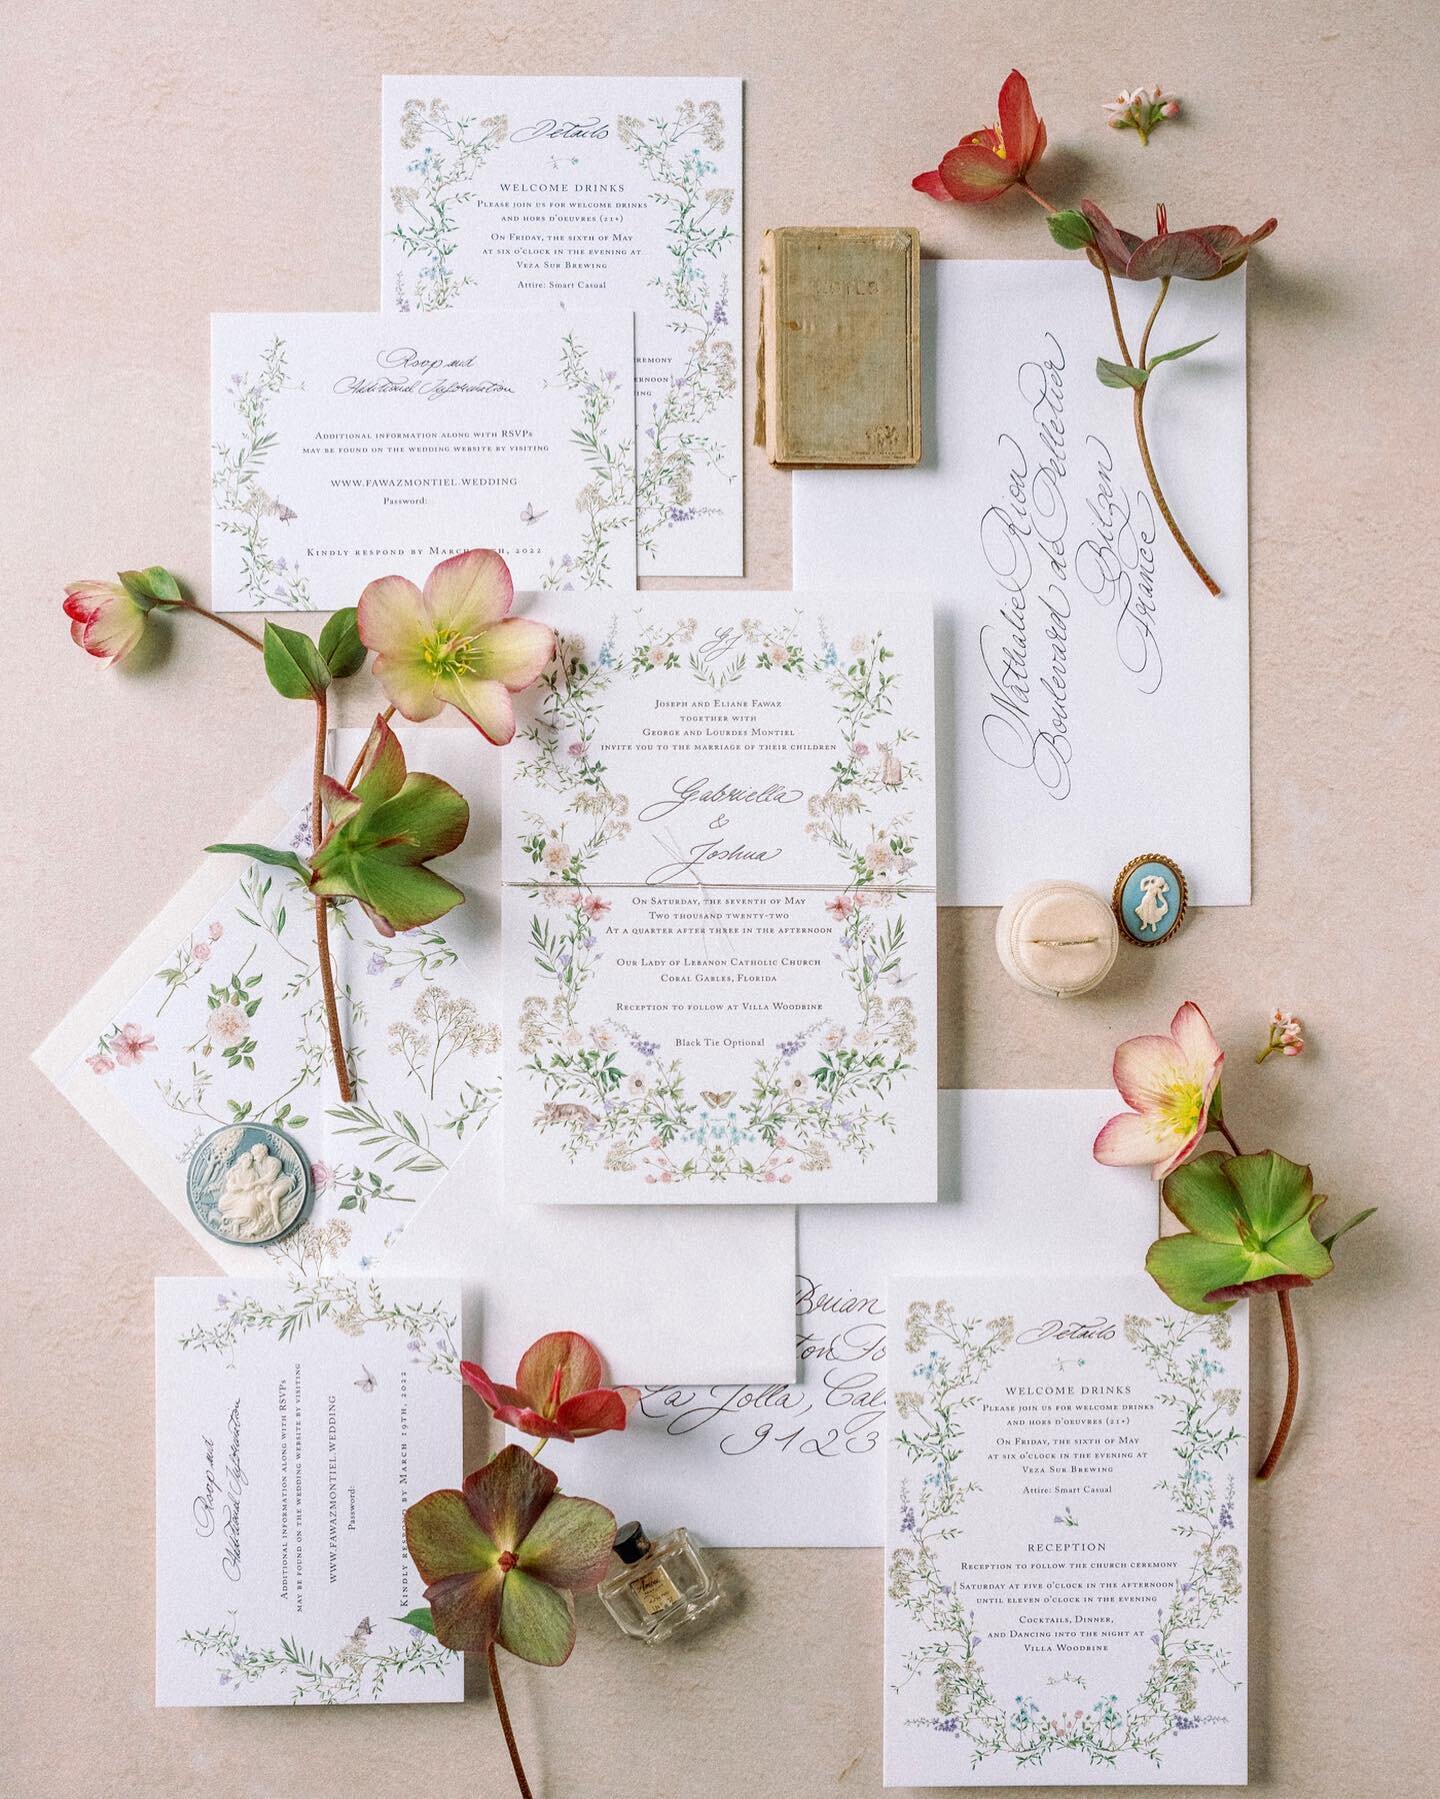 Invitations for G&amp;J - beautifully styled by @plumeevents 

Florals: @bouquetatlanta 
Styling Surface: @locustcollection 

#weddinginvitations #custominvitations #watercolorinvitation #letterpressinvitations #invitation